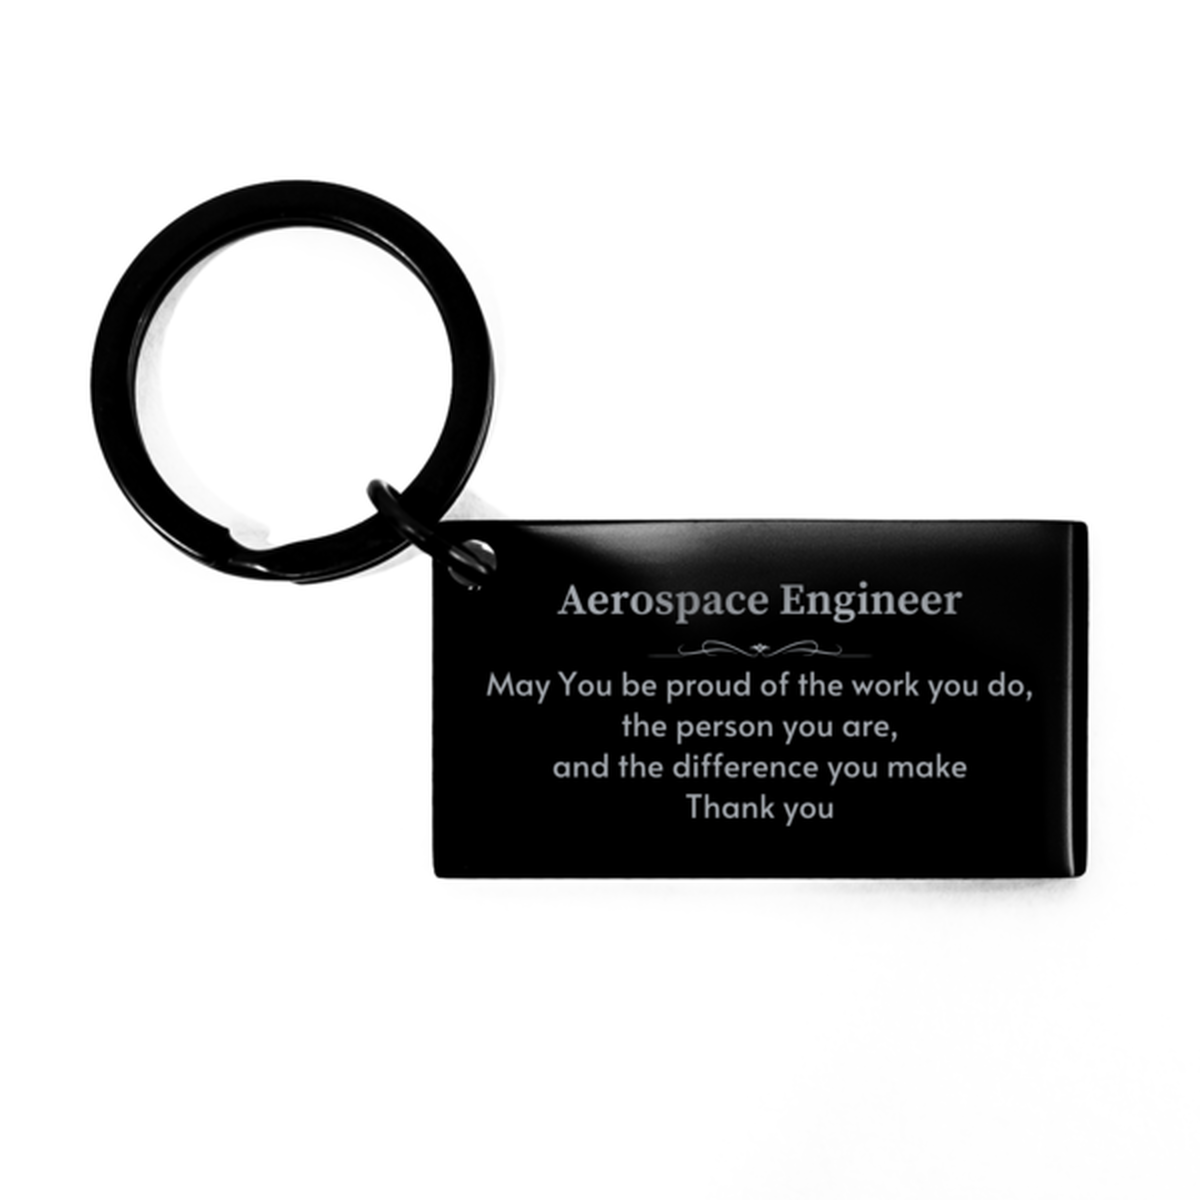 Heartwarming Keychain Retirement Coworkers Gifts for Aerospace Engineer, CFO May You be proud of the work you do, the person you are Gifts for Boss Men Women Friends